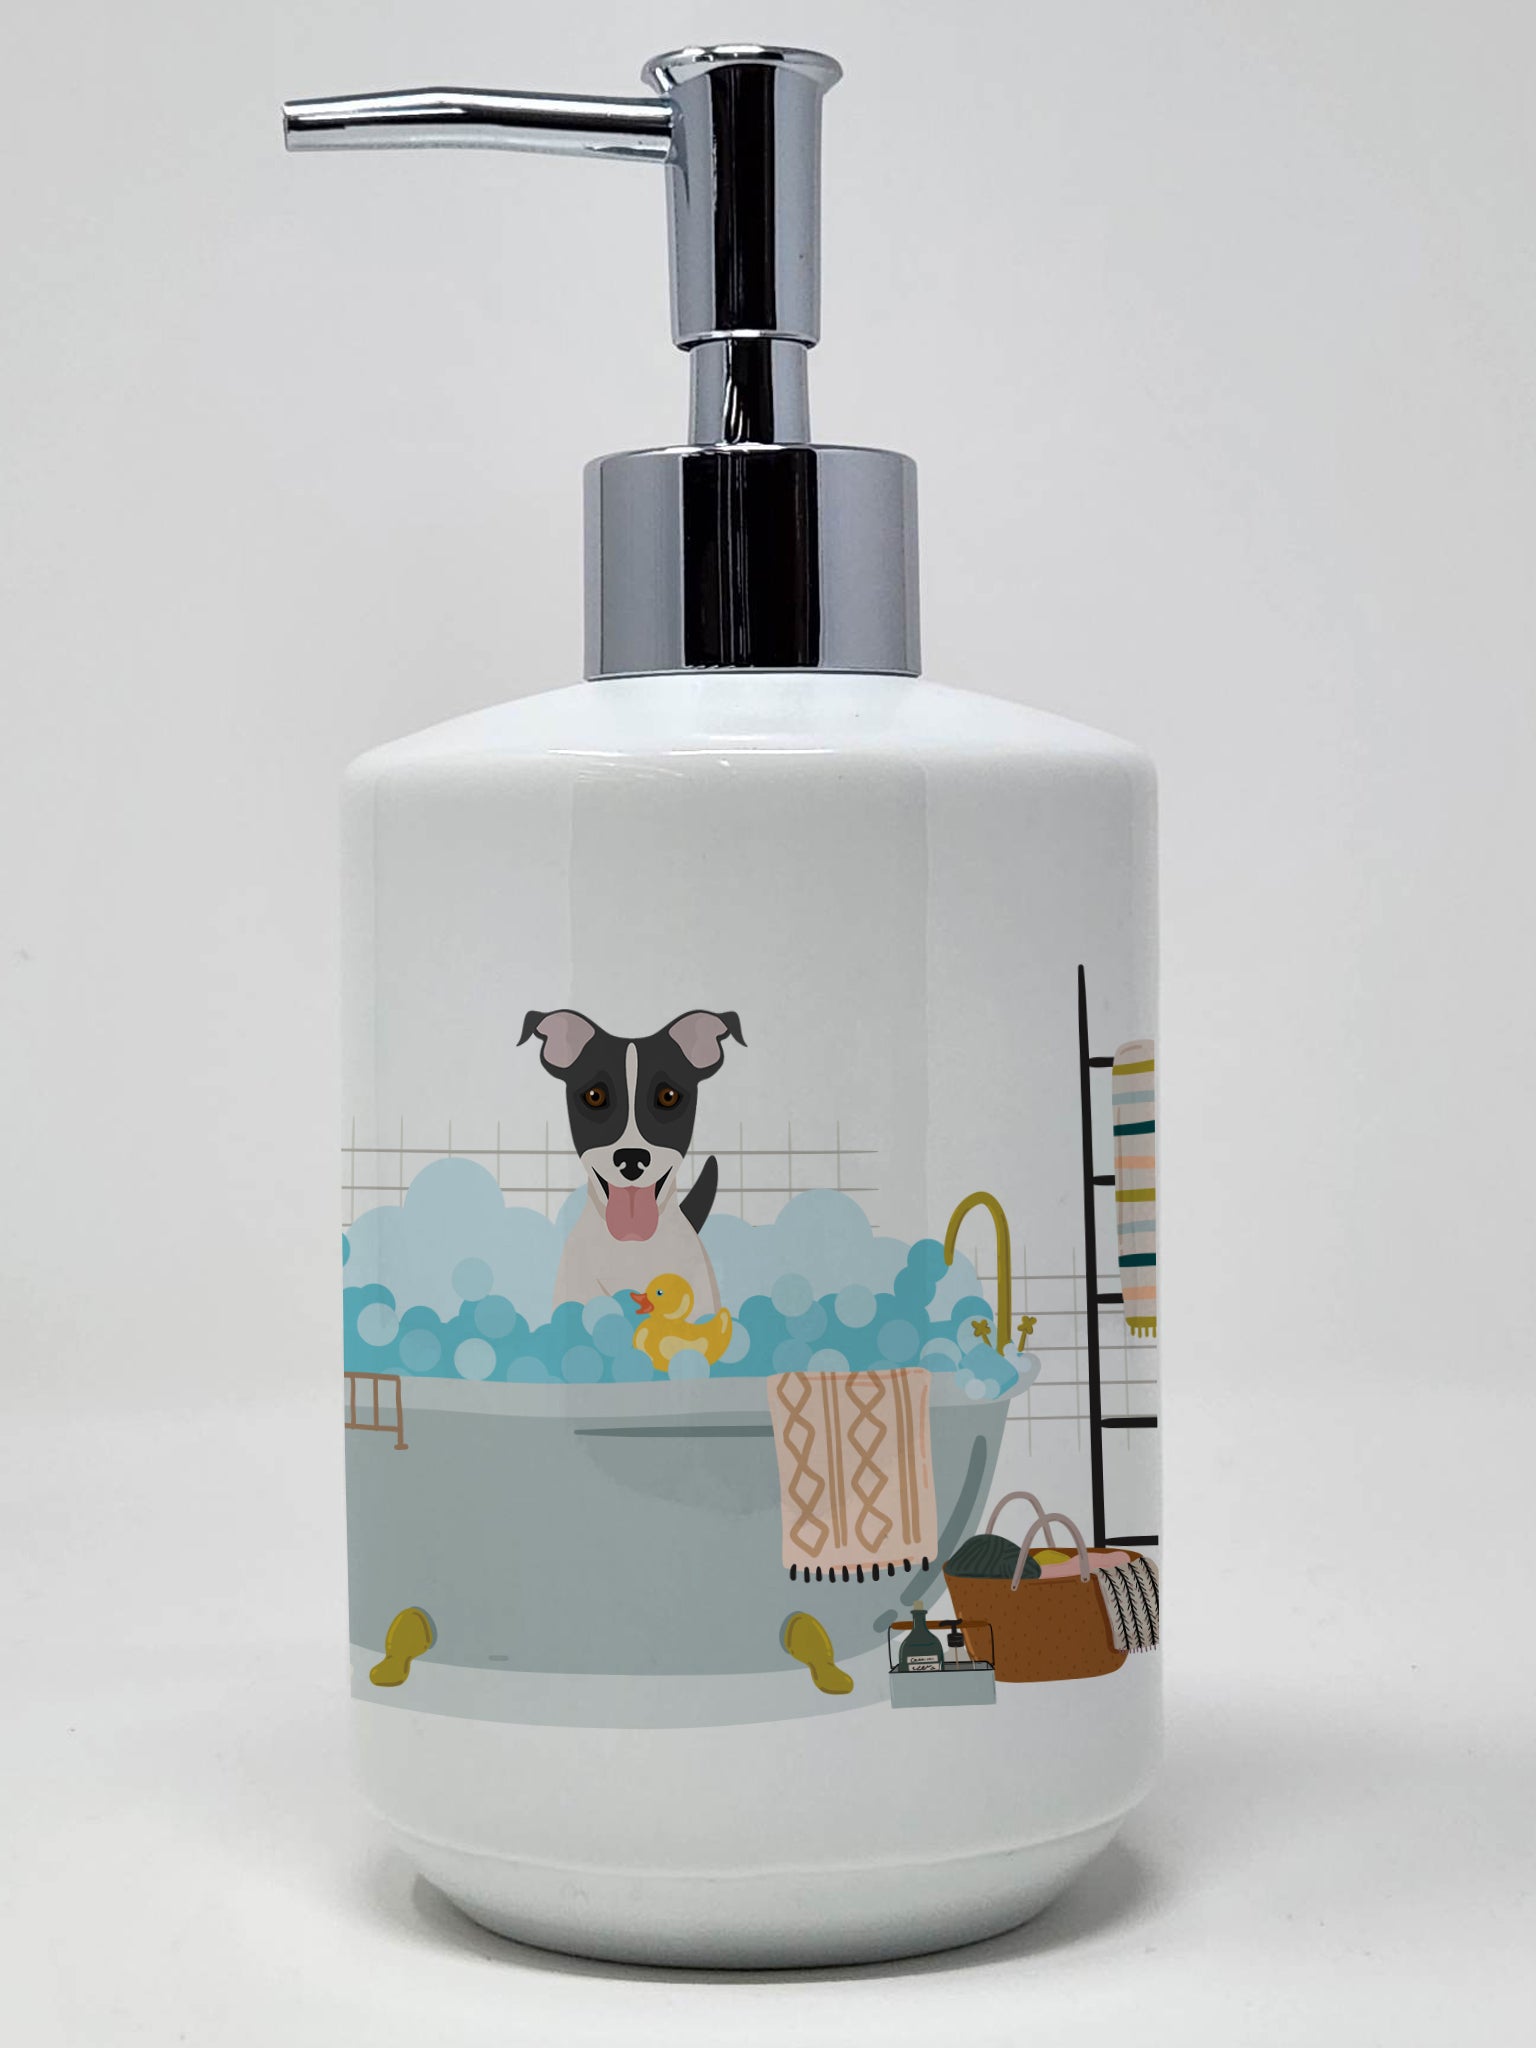 Buy this Black White Smooth Jack Russell Terrier Ceramic Soap Dispenser